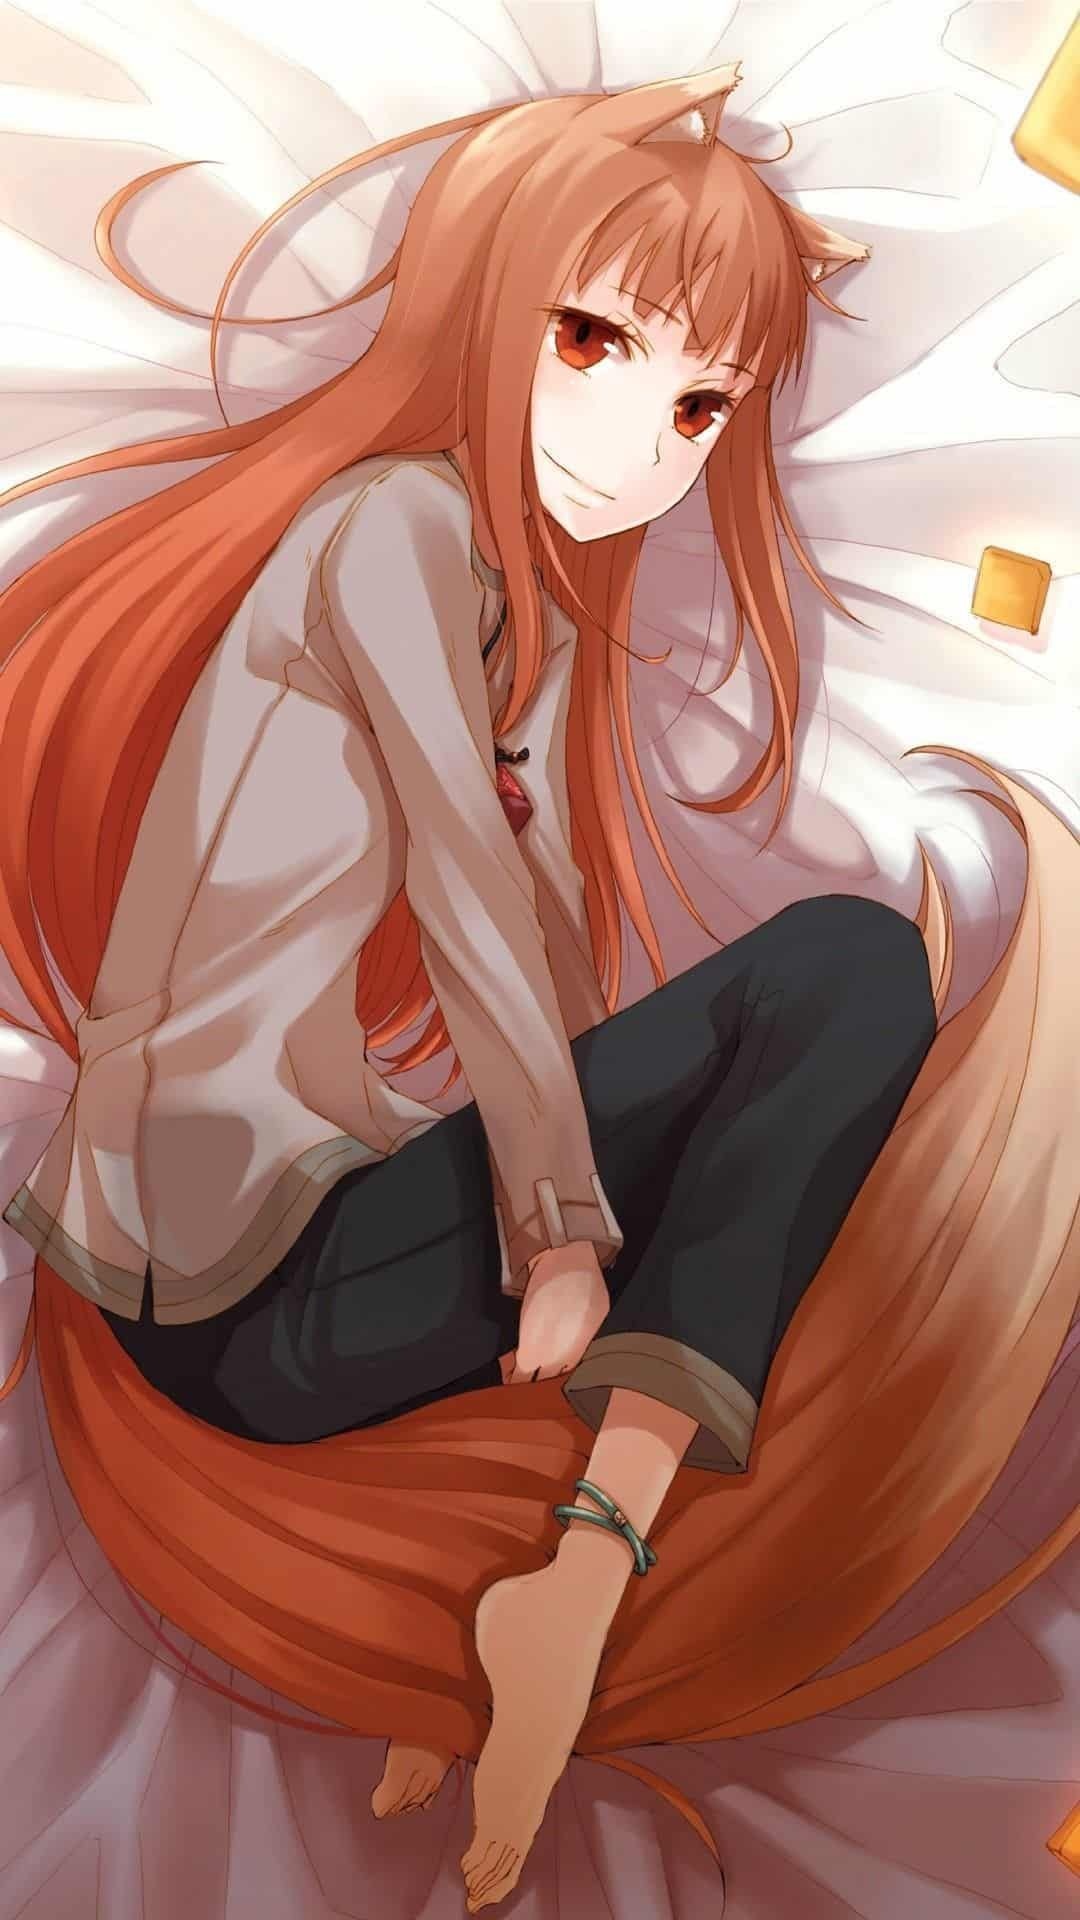 Spice and Wolf (Anime): The Wise Wolf, Haughty and self-sufficient. 1080x1920 Full HD Wallpaper.